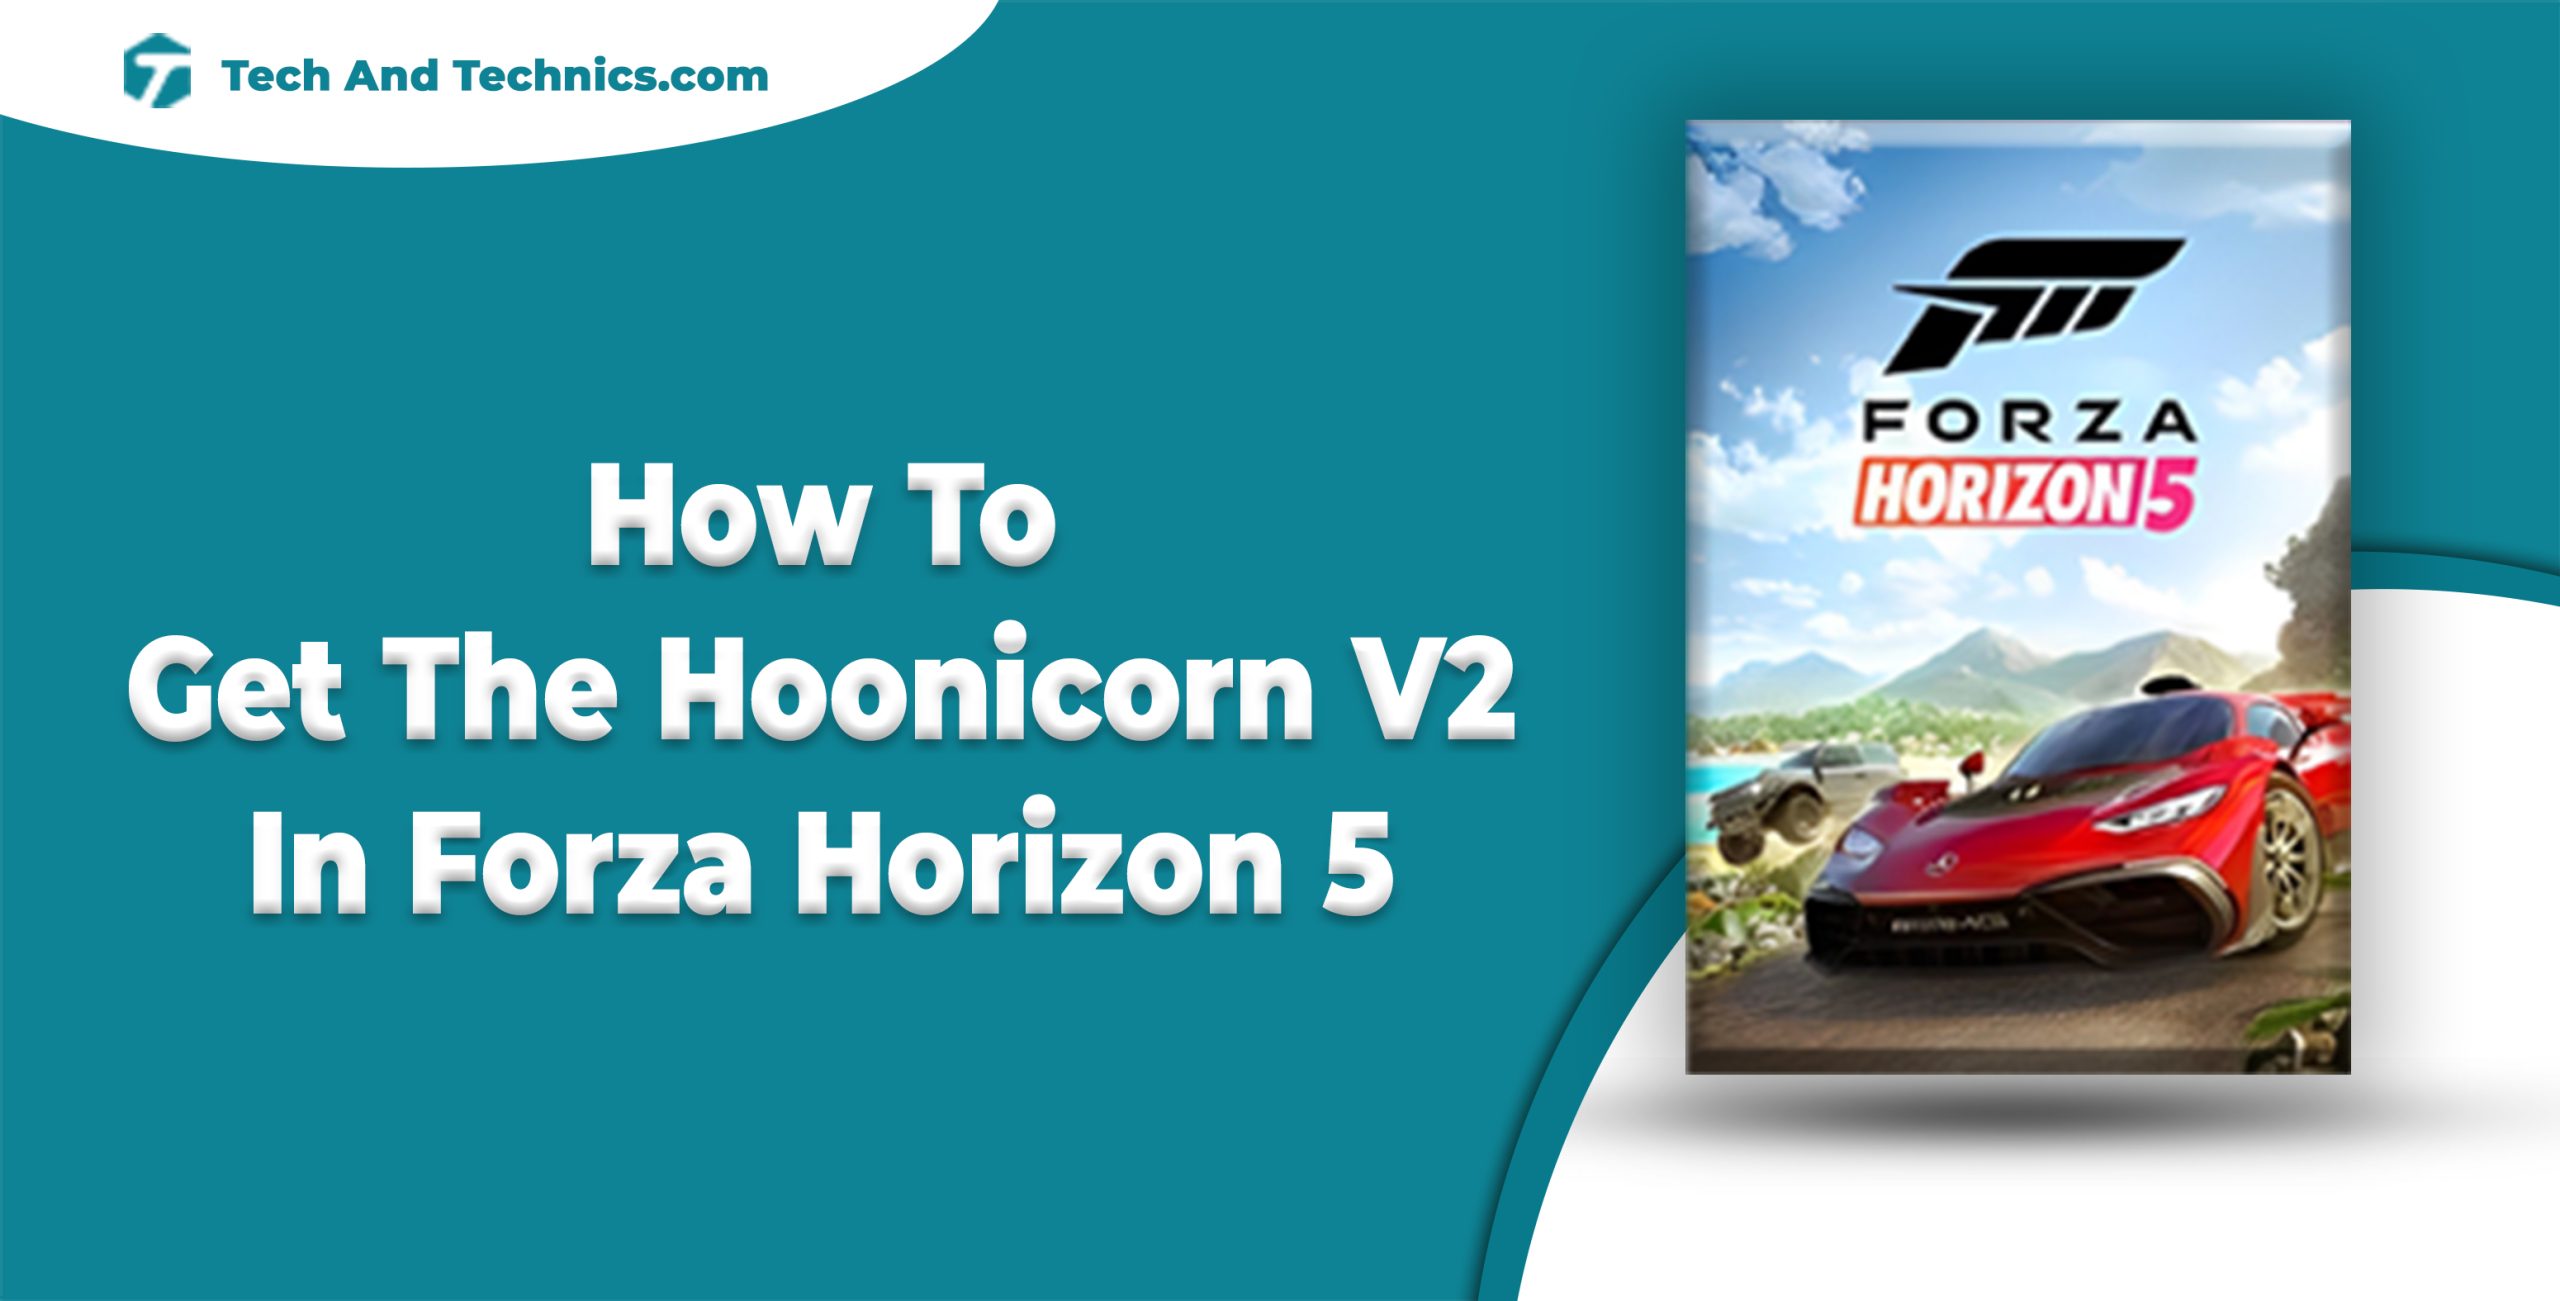 How To Get The Hoonicorn V2 In Forza Horizon 5 (Guide)